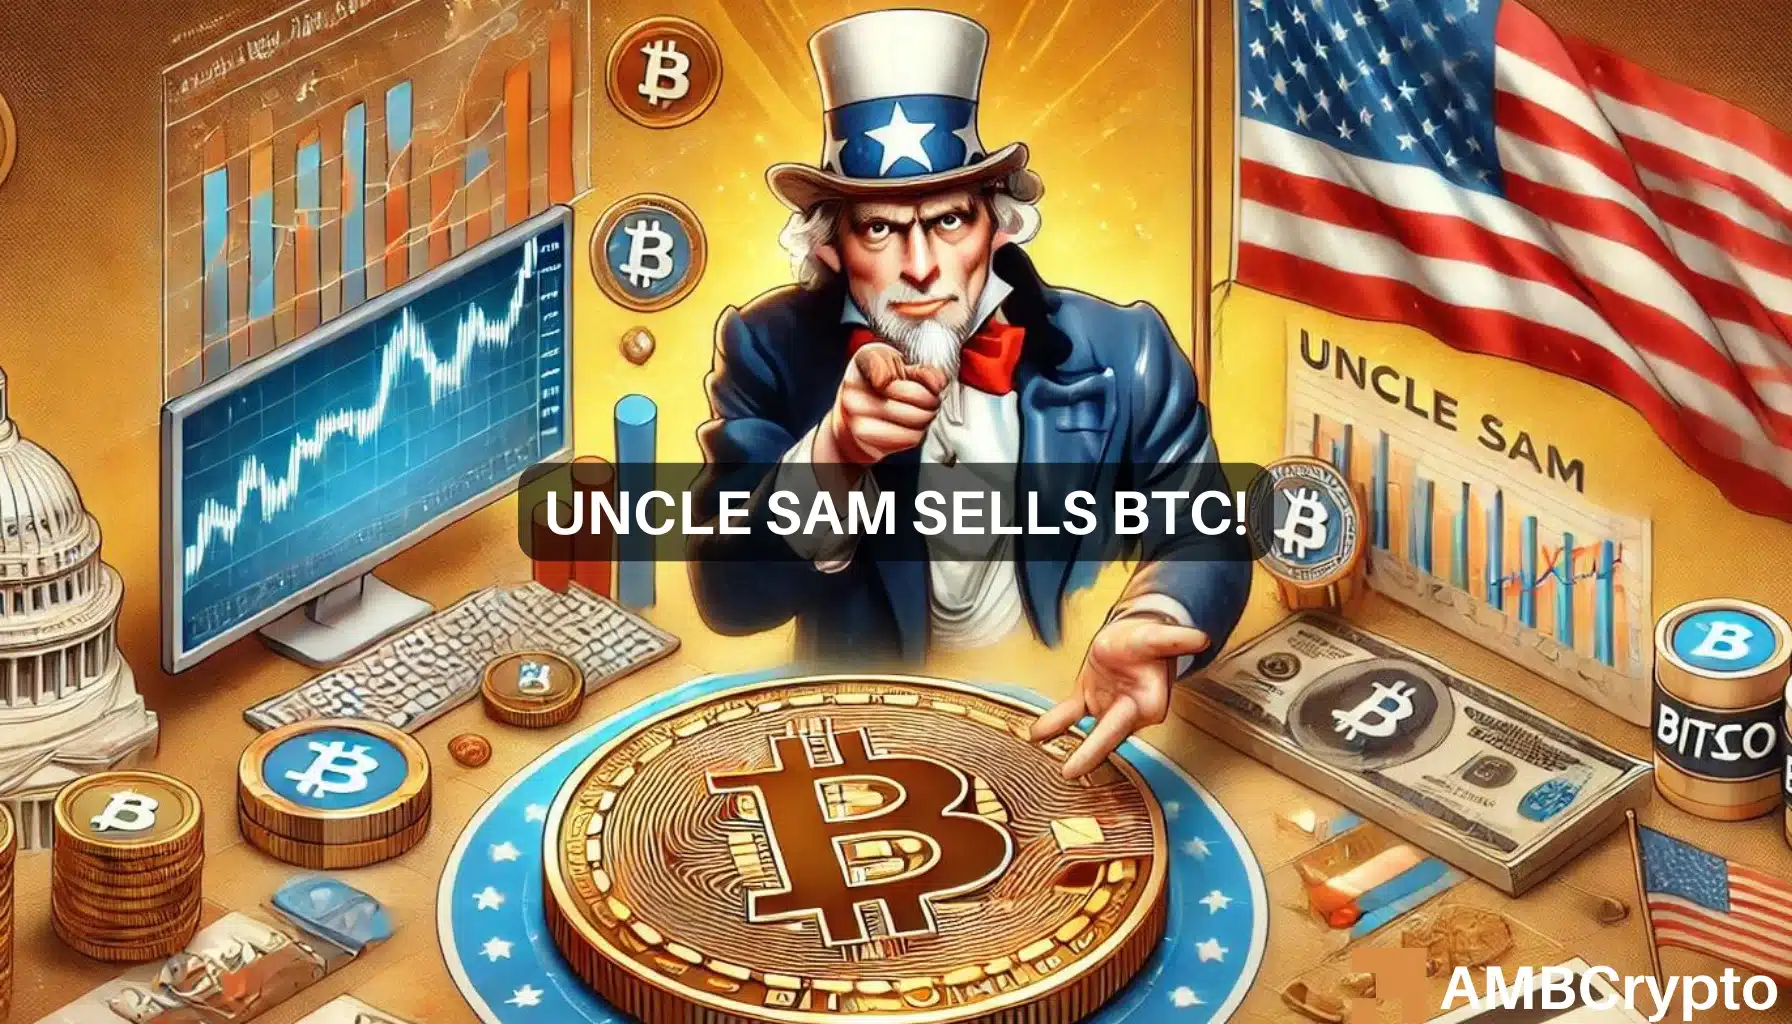 U.S. moves Bitcoin worth $4M: Sell-off fears mount once again